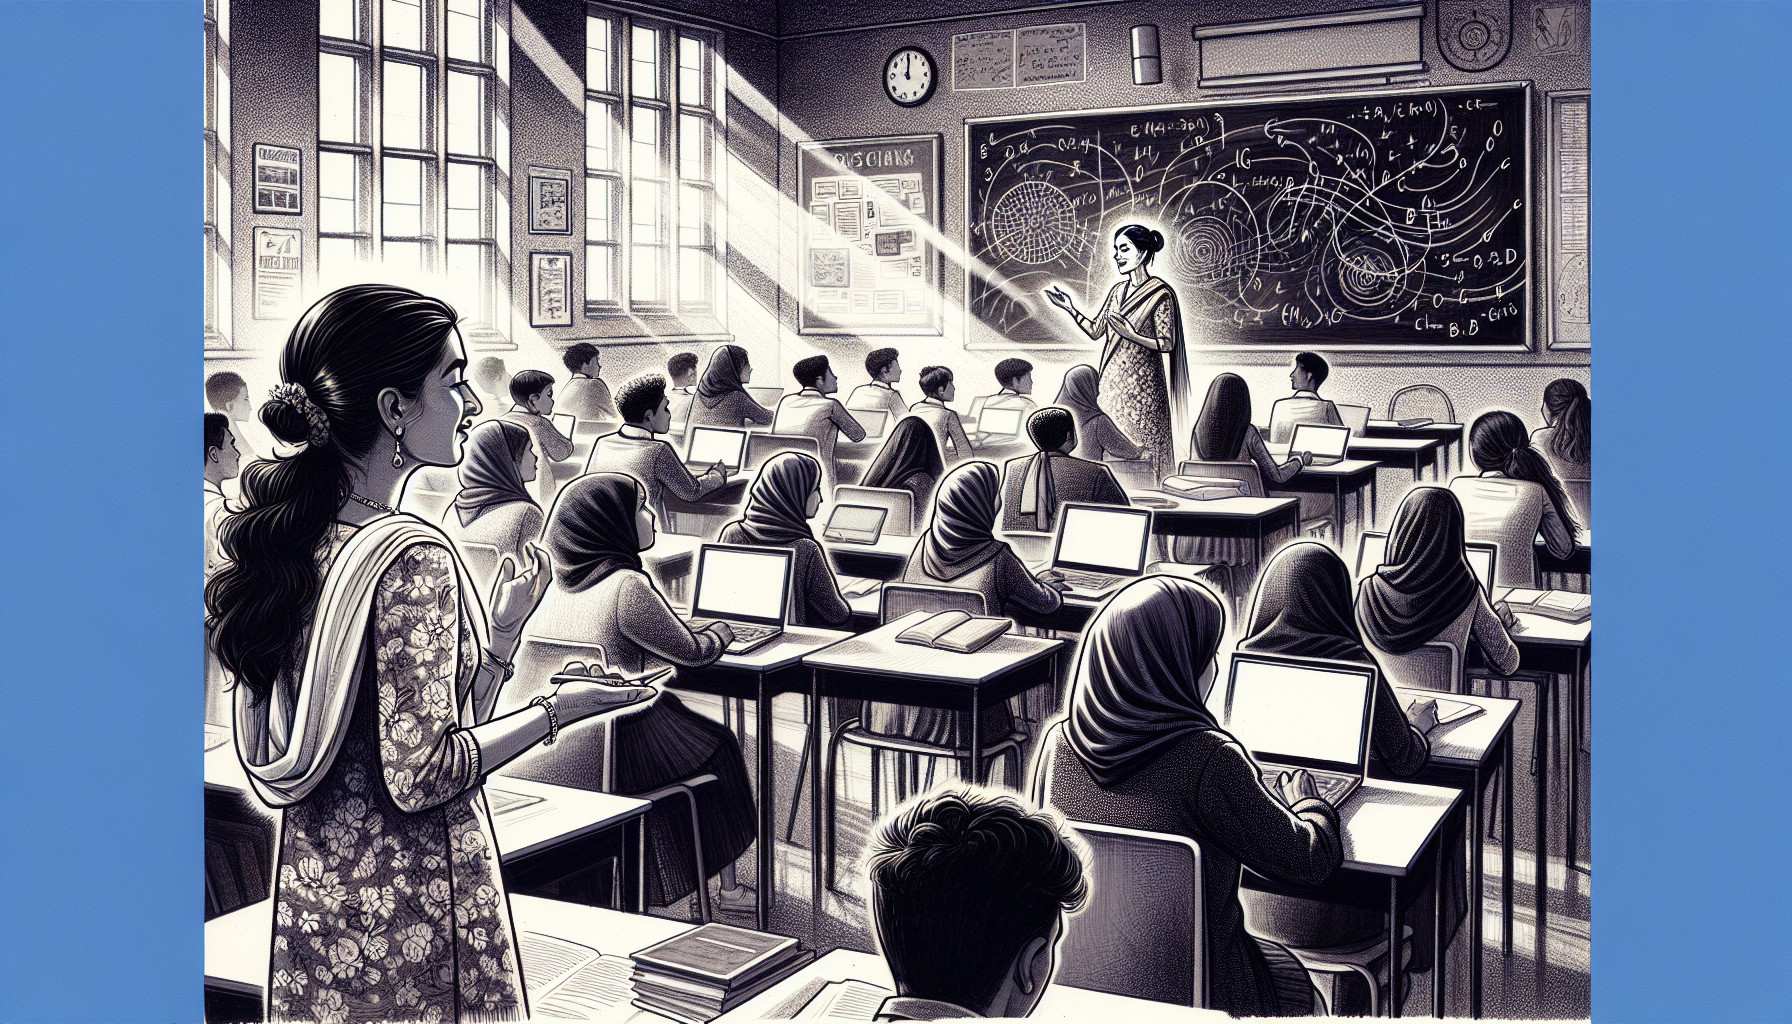 Illustration of a teacher in a sixth form college classroom